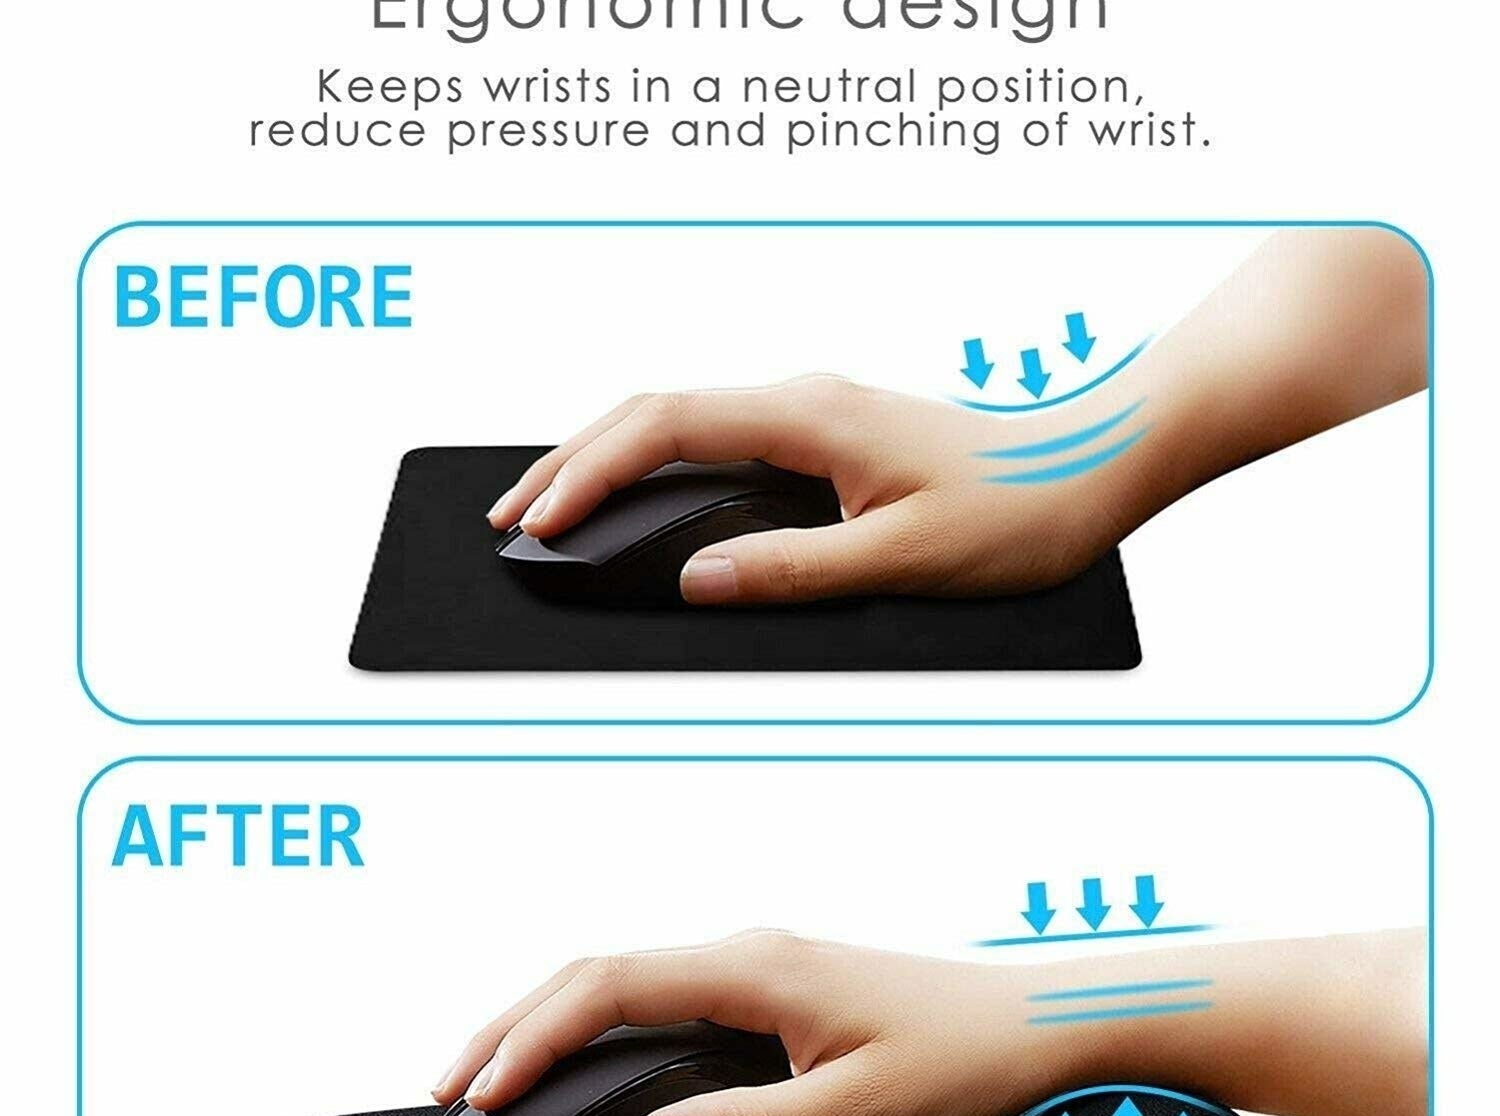 Before and after images of a person using a mouse on a normal mouse pad and an ergonomic mouse pad.